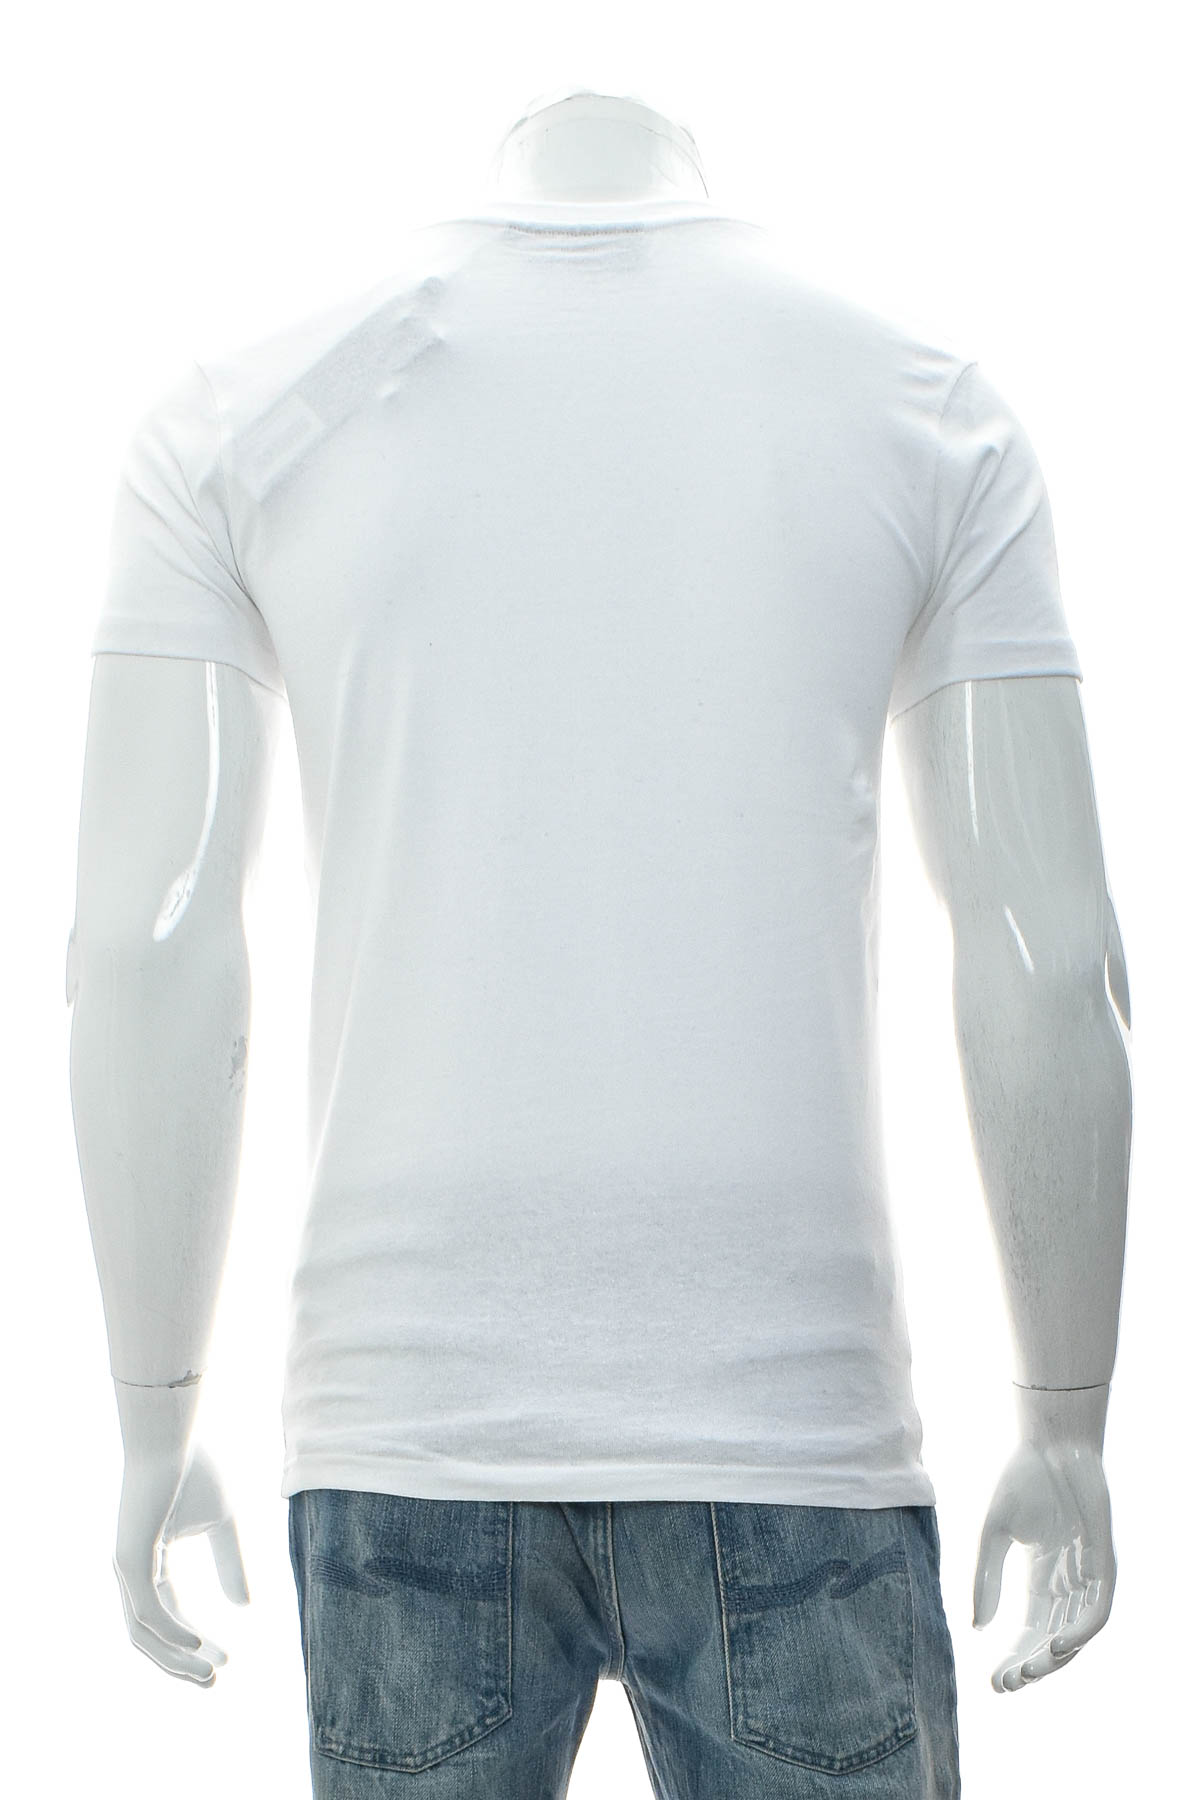 Men's T-shirt - The Couture Club - 1